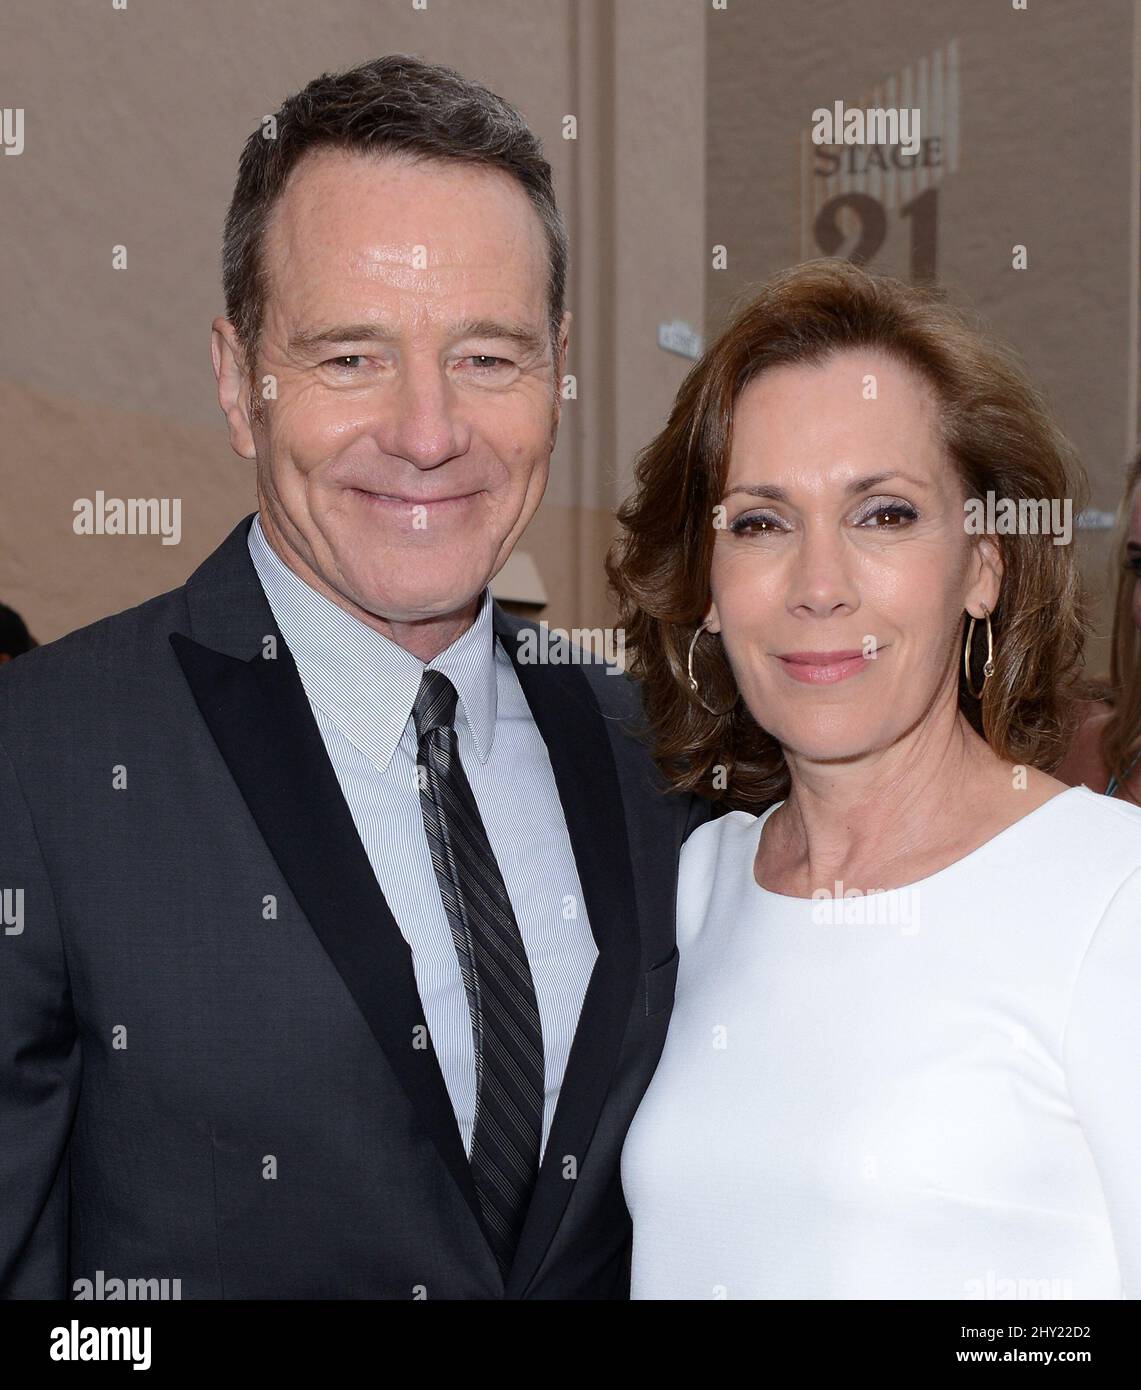 Bryan Cranston and wife Robin Dearden arriving for the premiere of Breaking Bad held at Sony Pictures Studios in Culver City, Los Angeles. Stock Photo